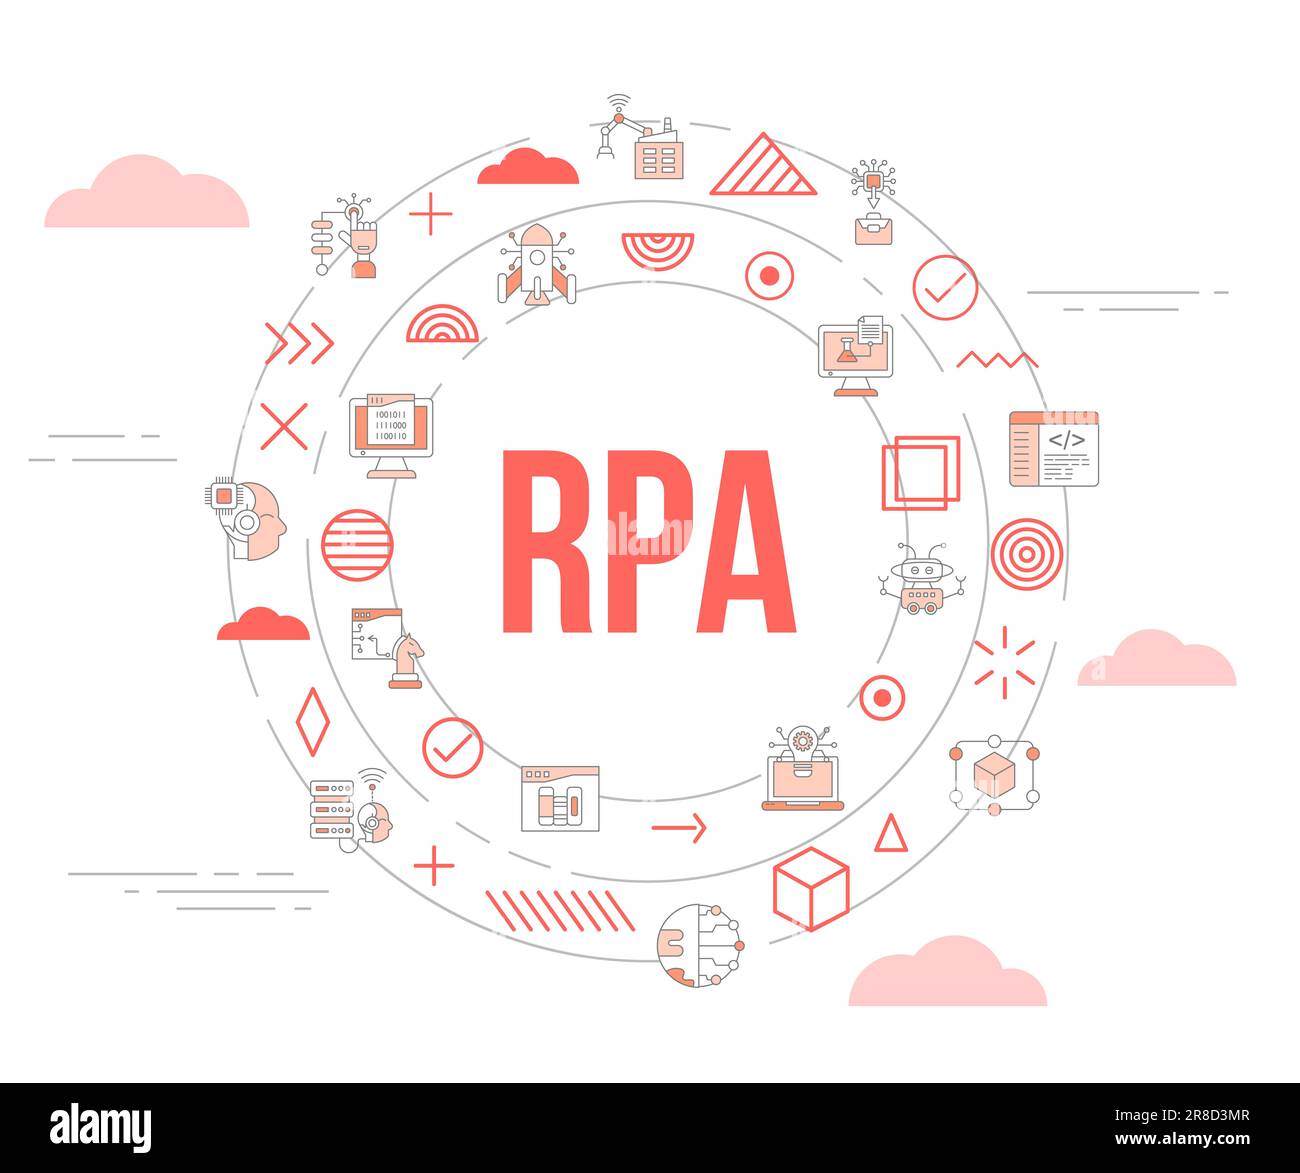 rpa robotic process automation concept with icon set template banner and circle round shape illustration Stock Photo